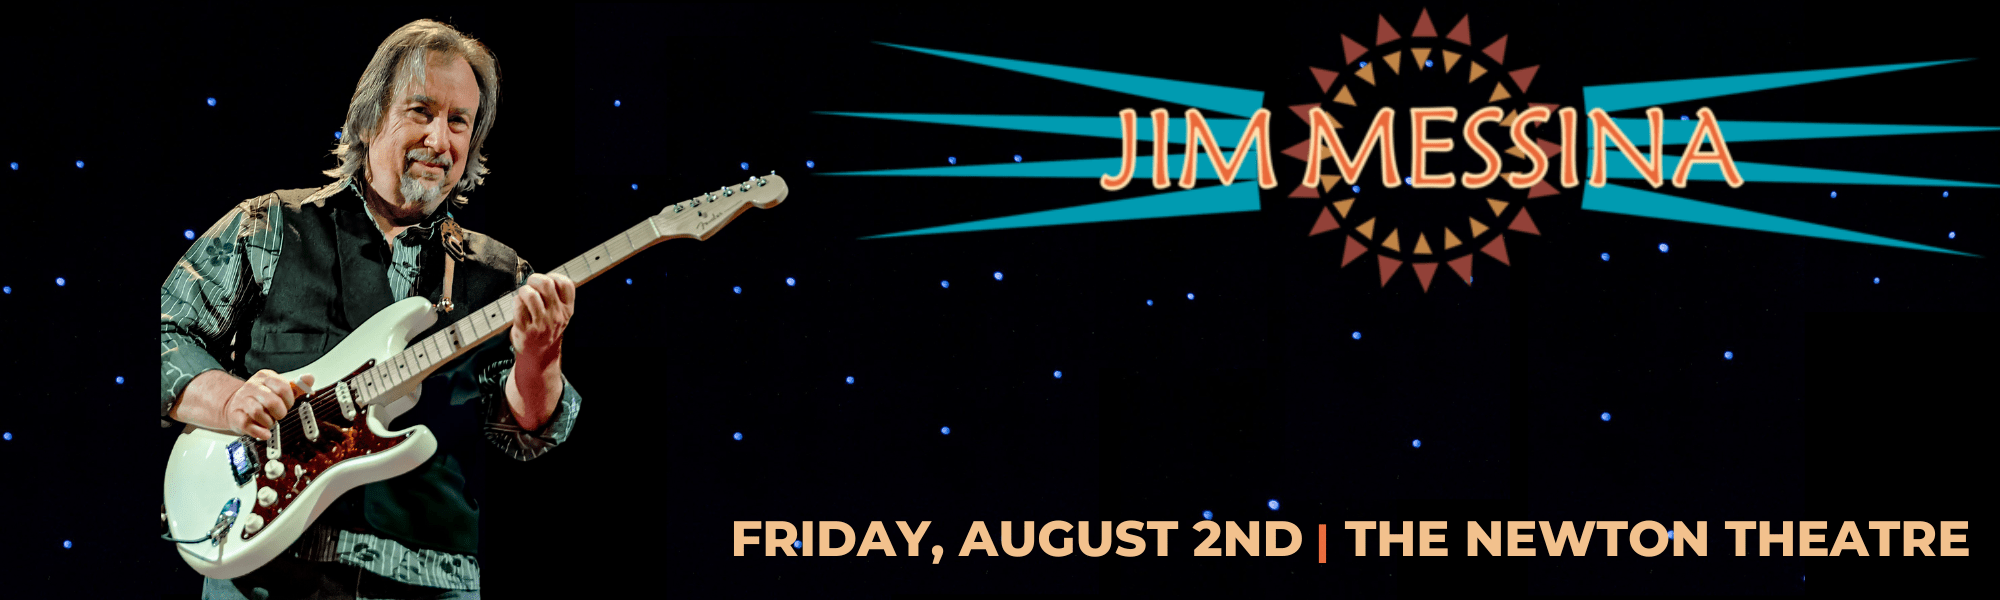 Jim Messina plays The Newton Theatre on Friday, August 2nd.